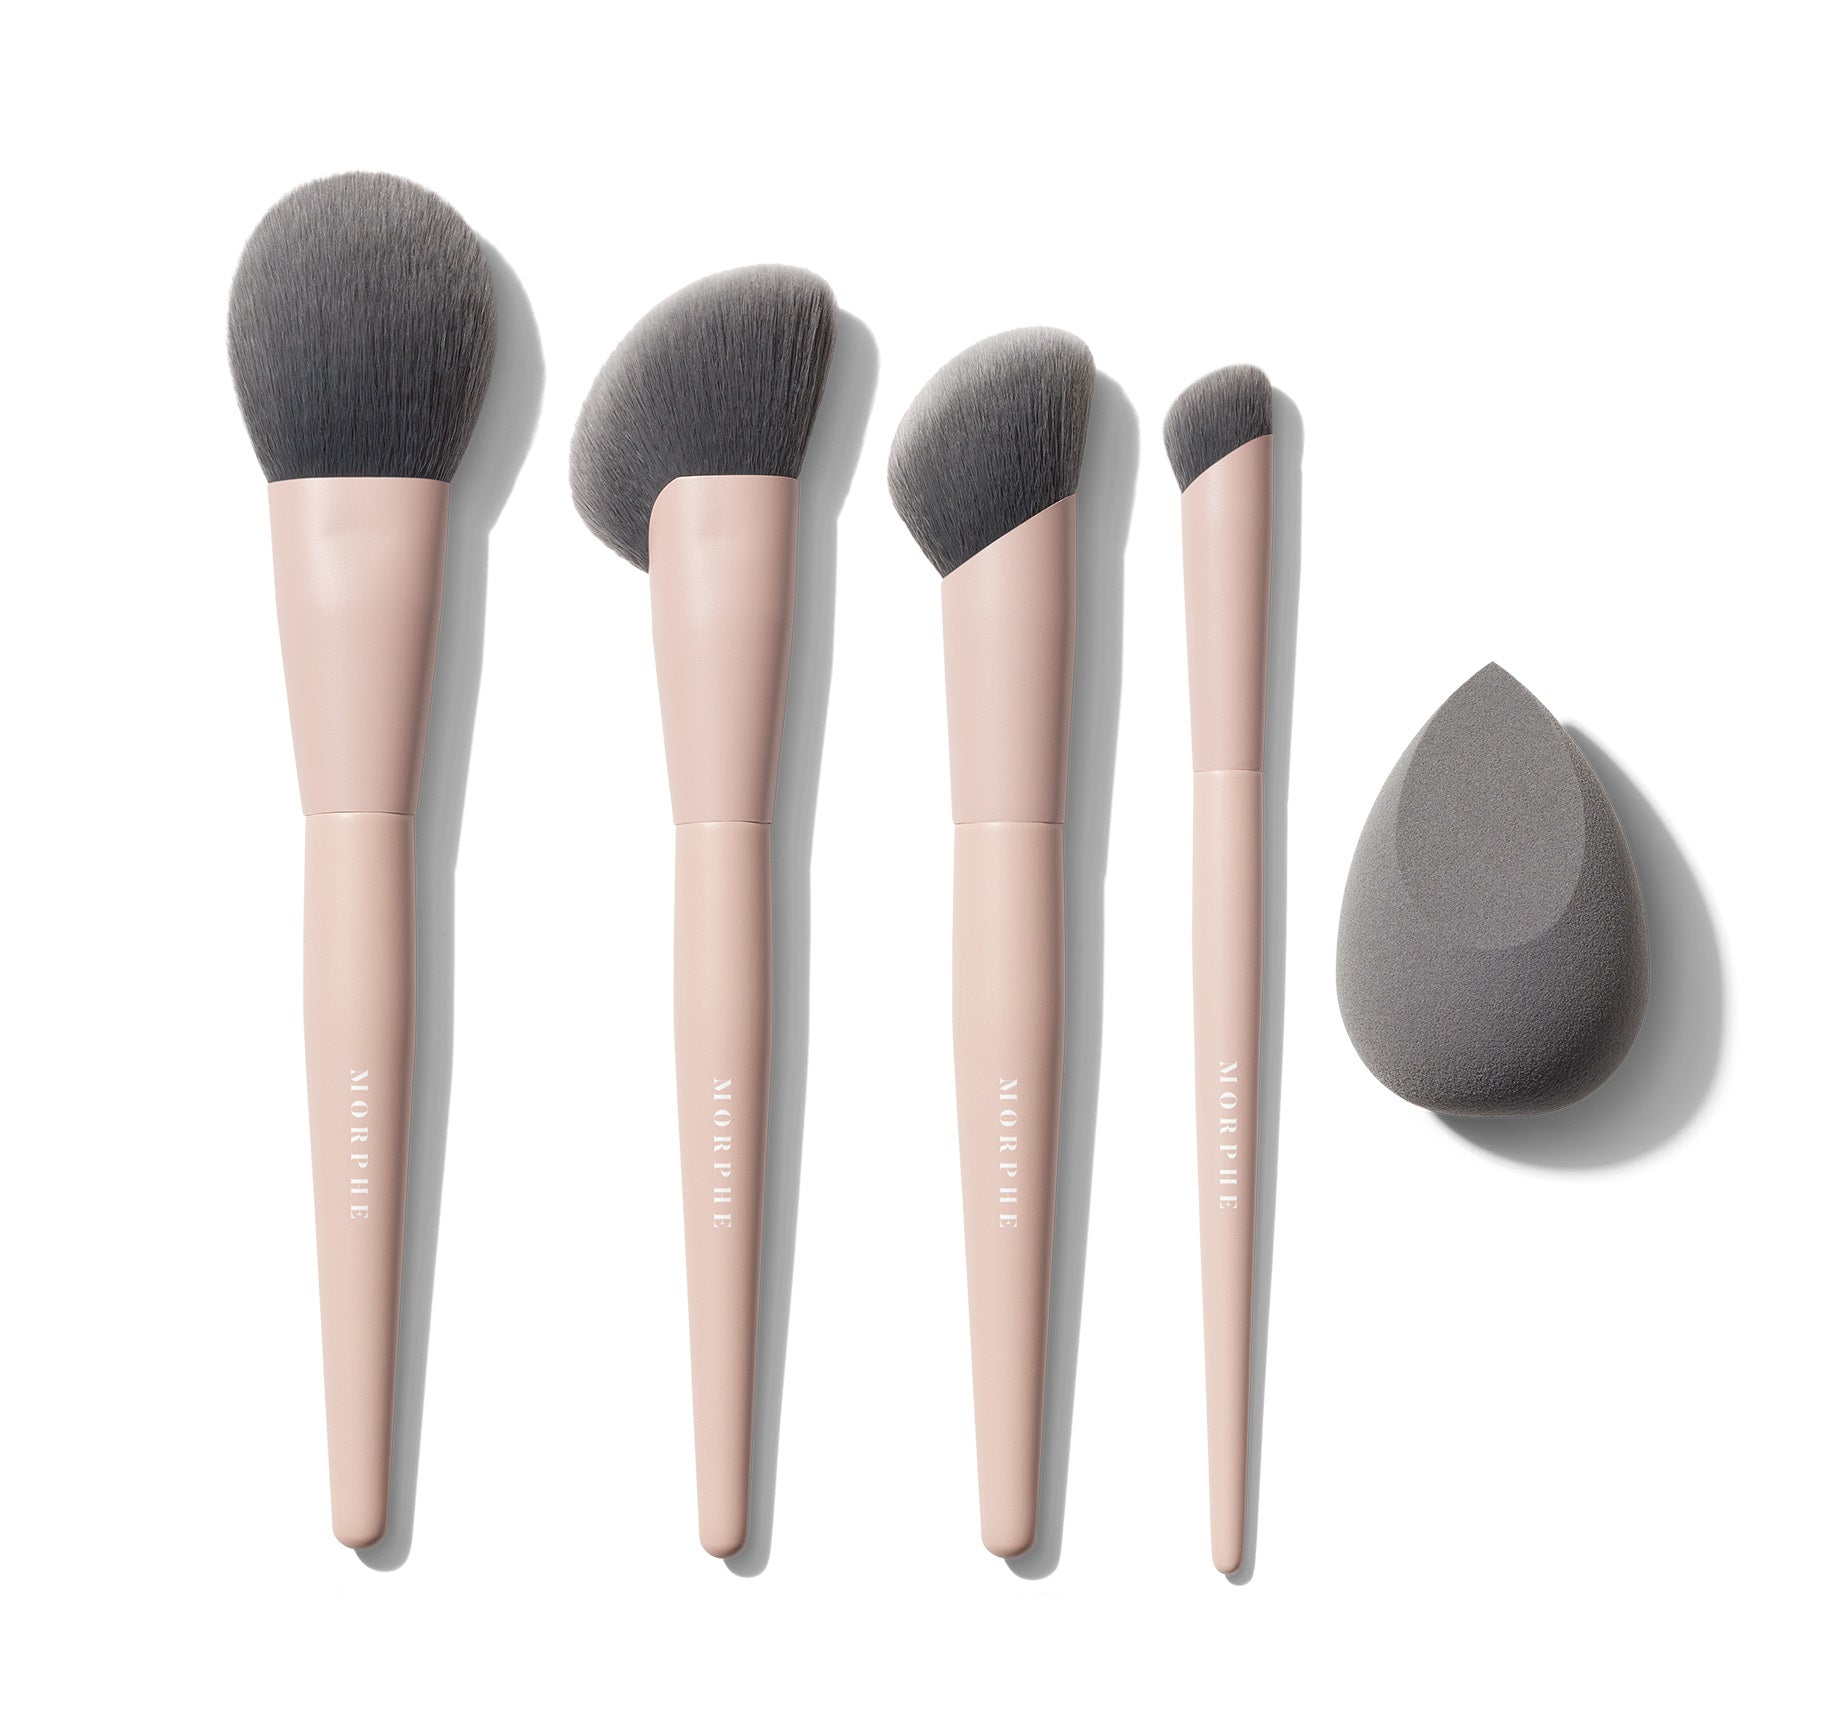 Face Shaping Essentials Bamboo & Charcoal Infused Face Brush Set - Image 1